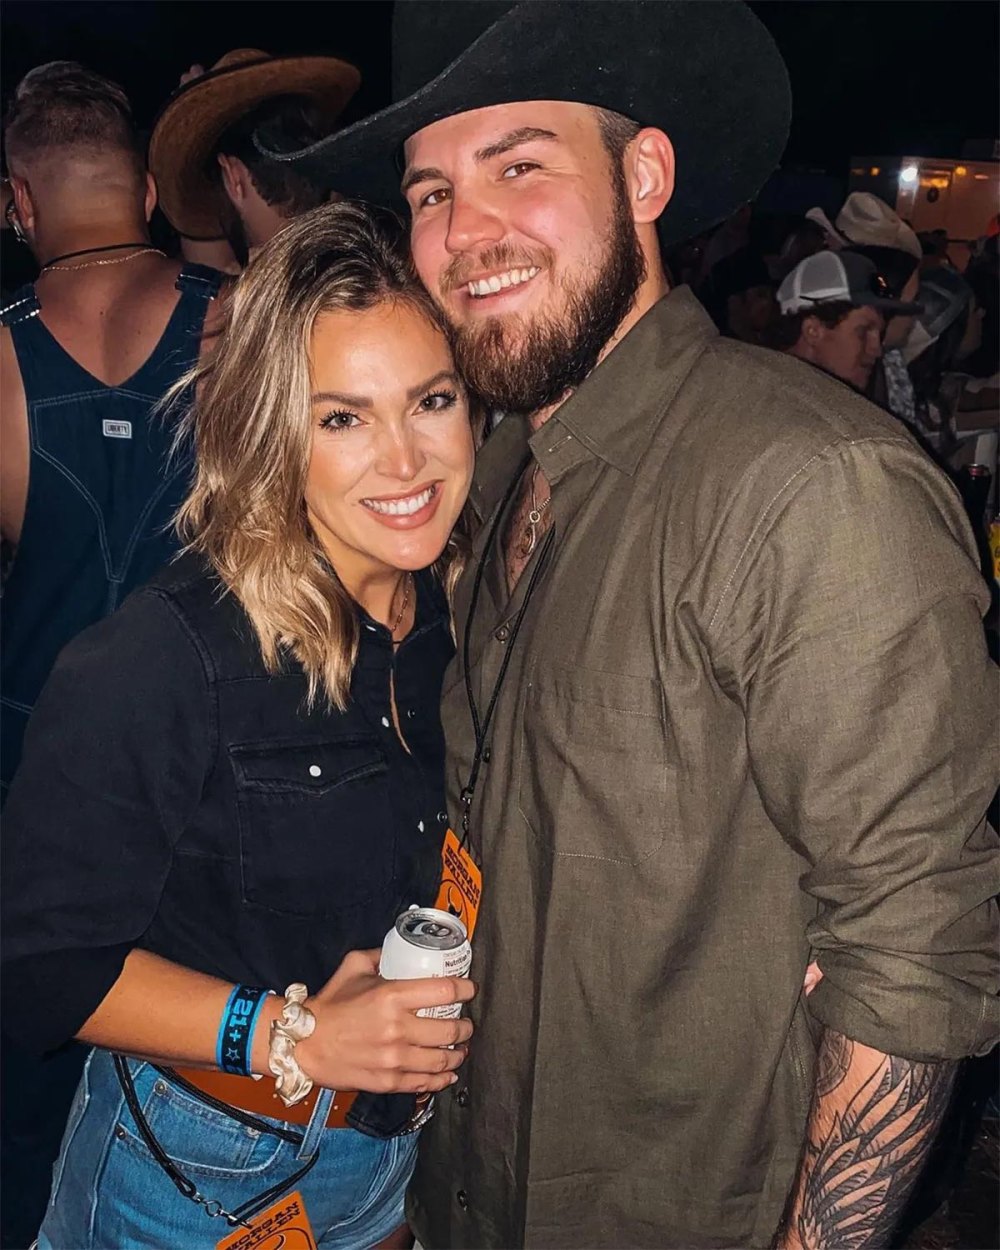 Hannah Brown Admits to Having a ‘Hard Time’ With Brother’s Marriage to Haley Stevens- ‘Messed Up’